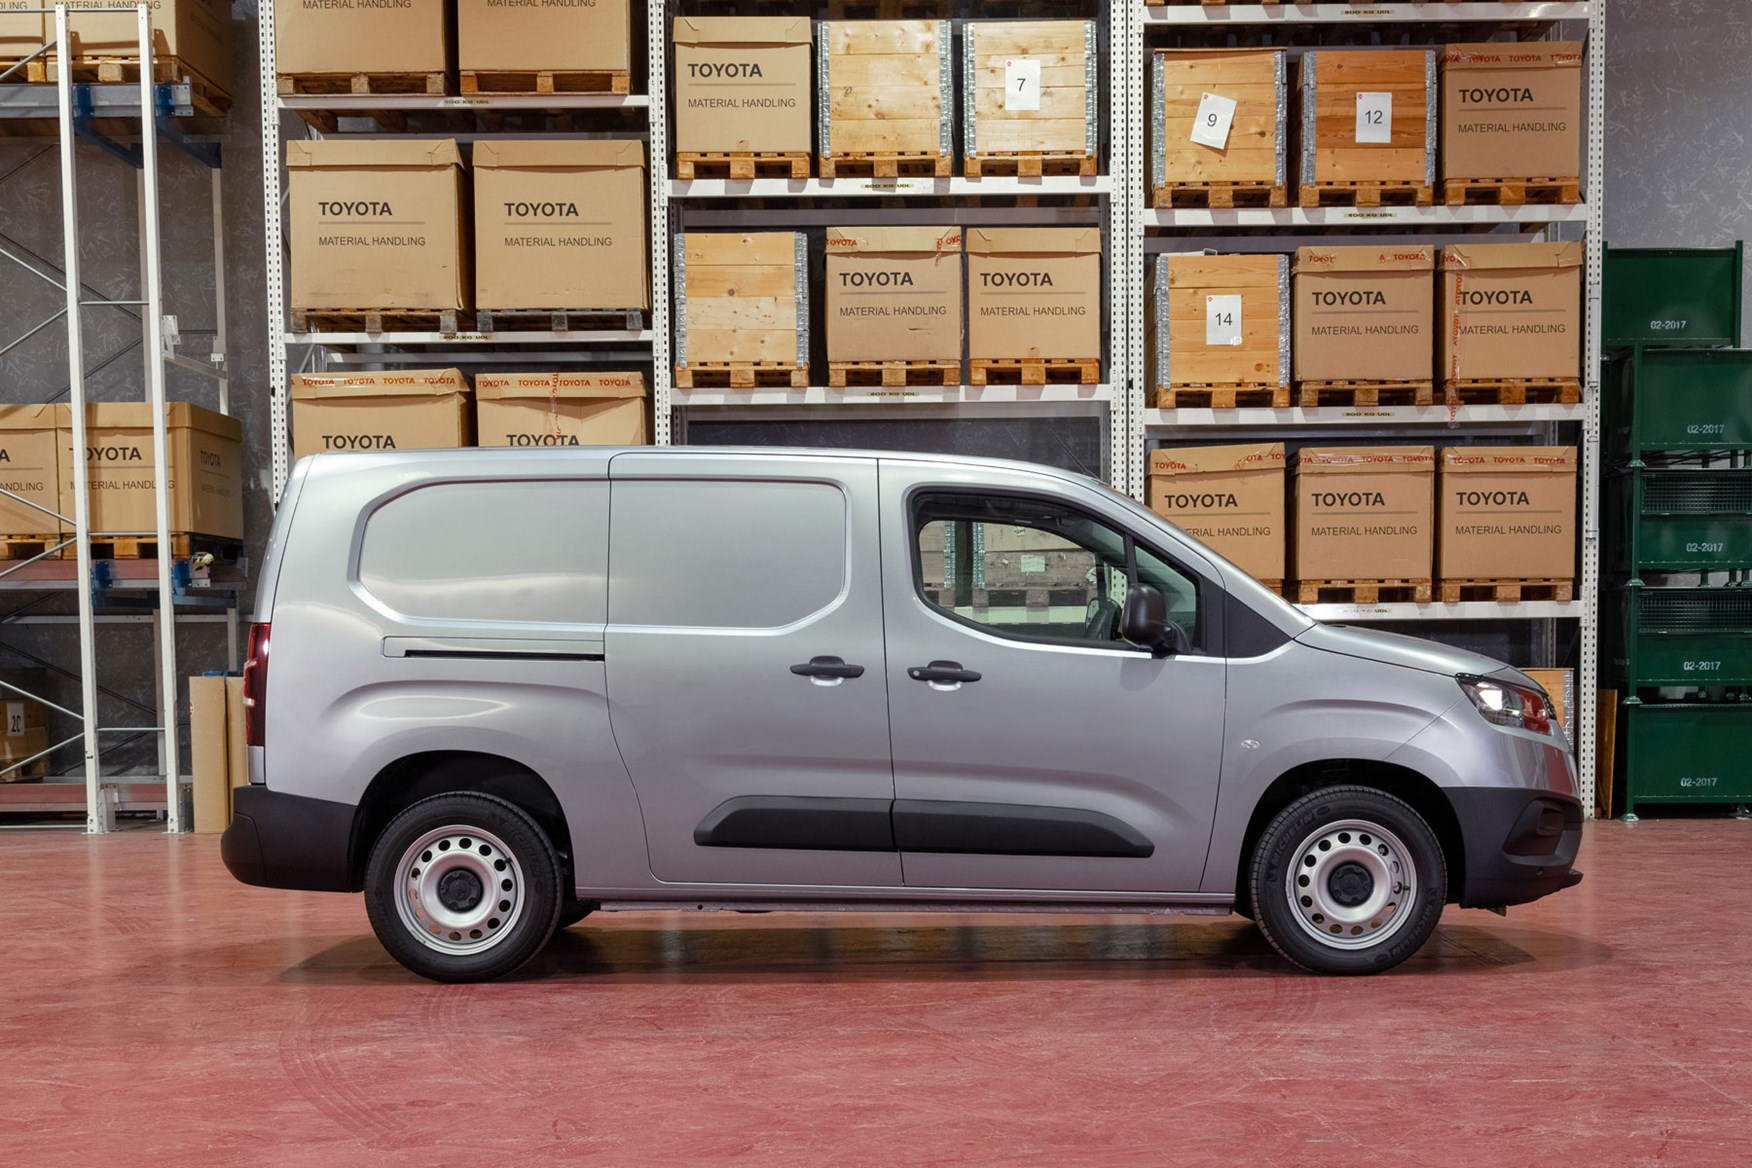 2020 Toyota Proace City review - LWB, side view, silver